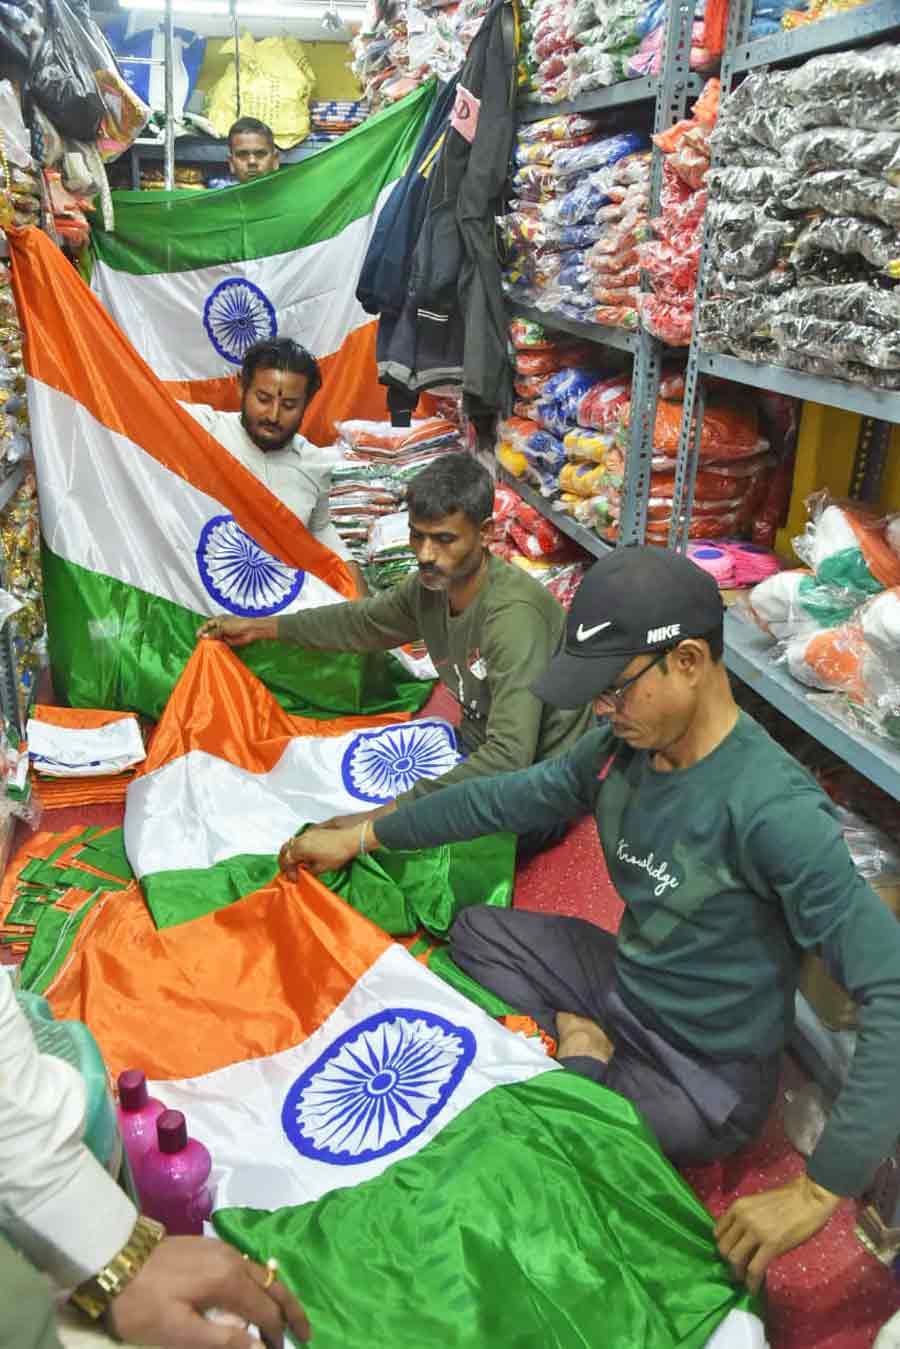 The Tricolour at Bagri Market for sale ahead of Republic Day   